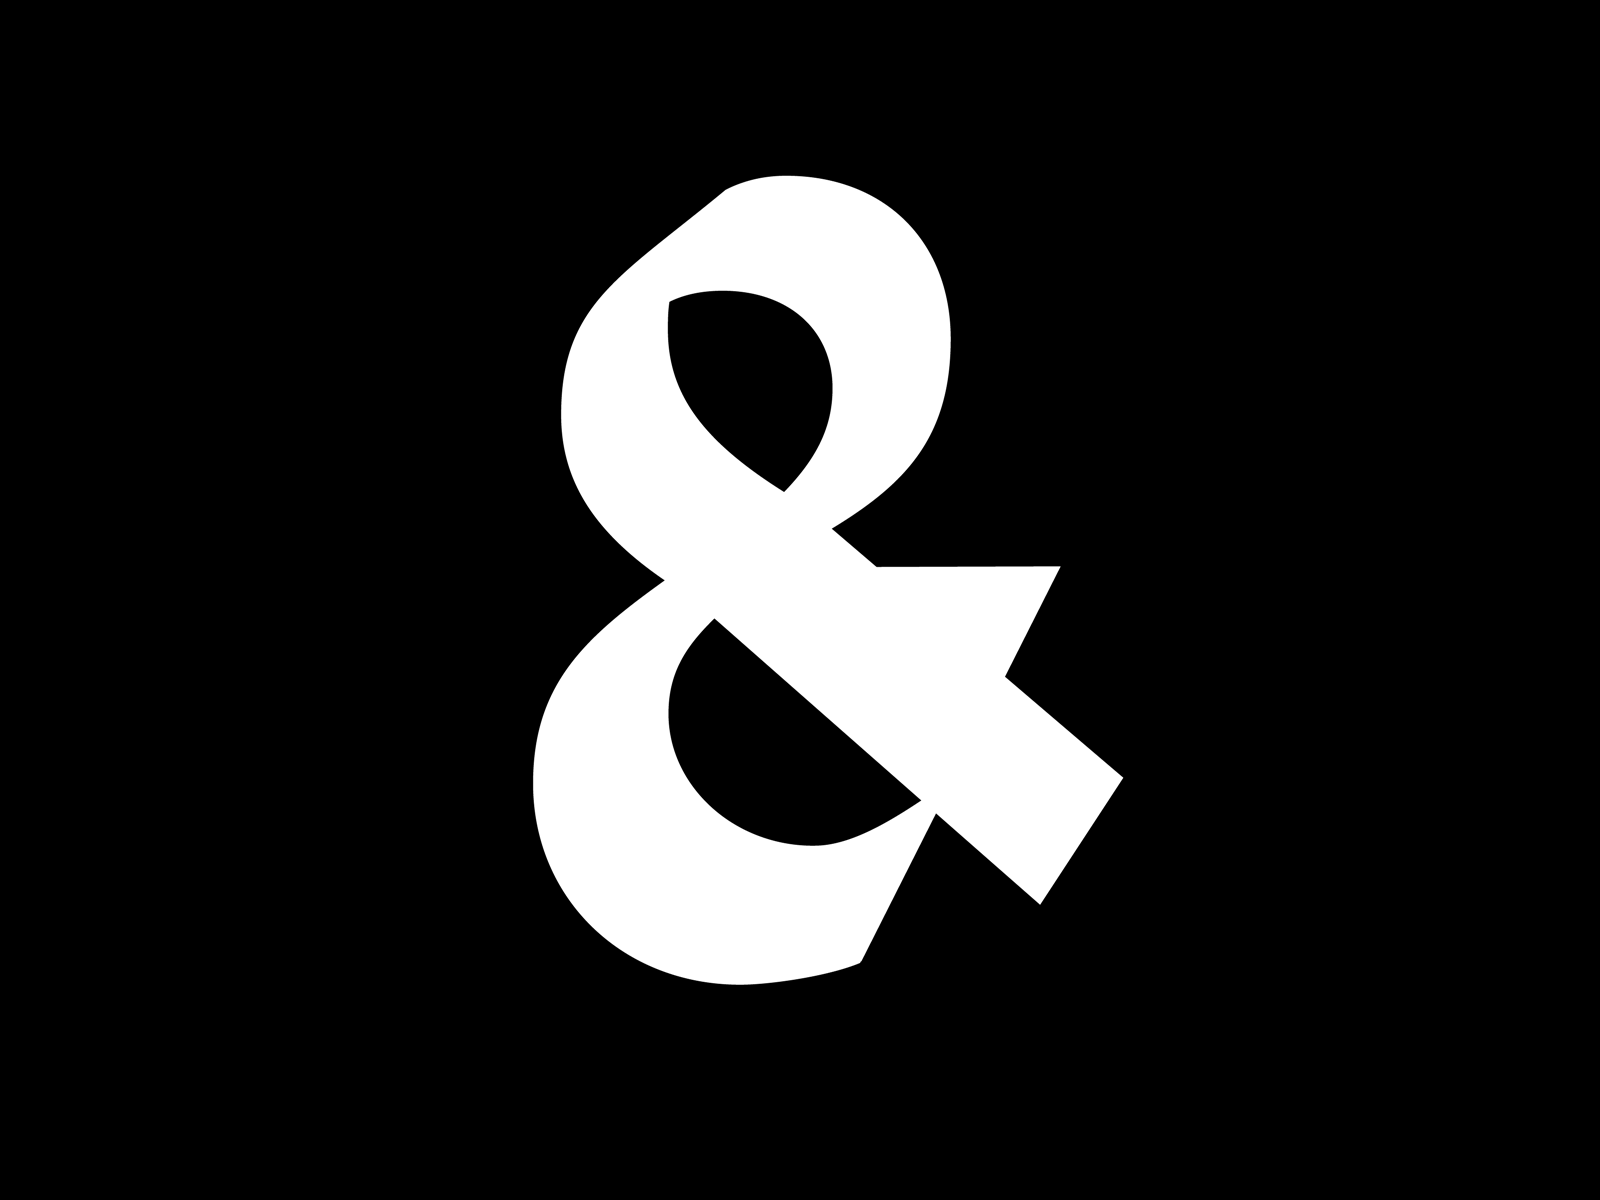 Eves & Sons Barbers Ampersand Mark branding graphic design logo typography